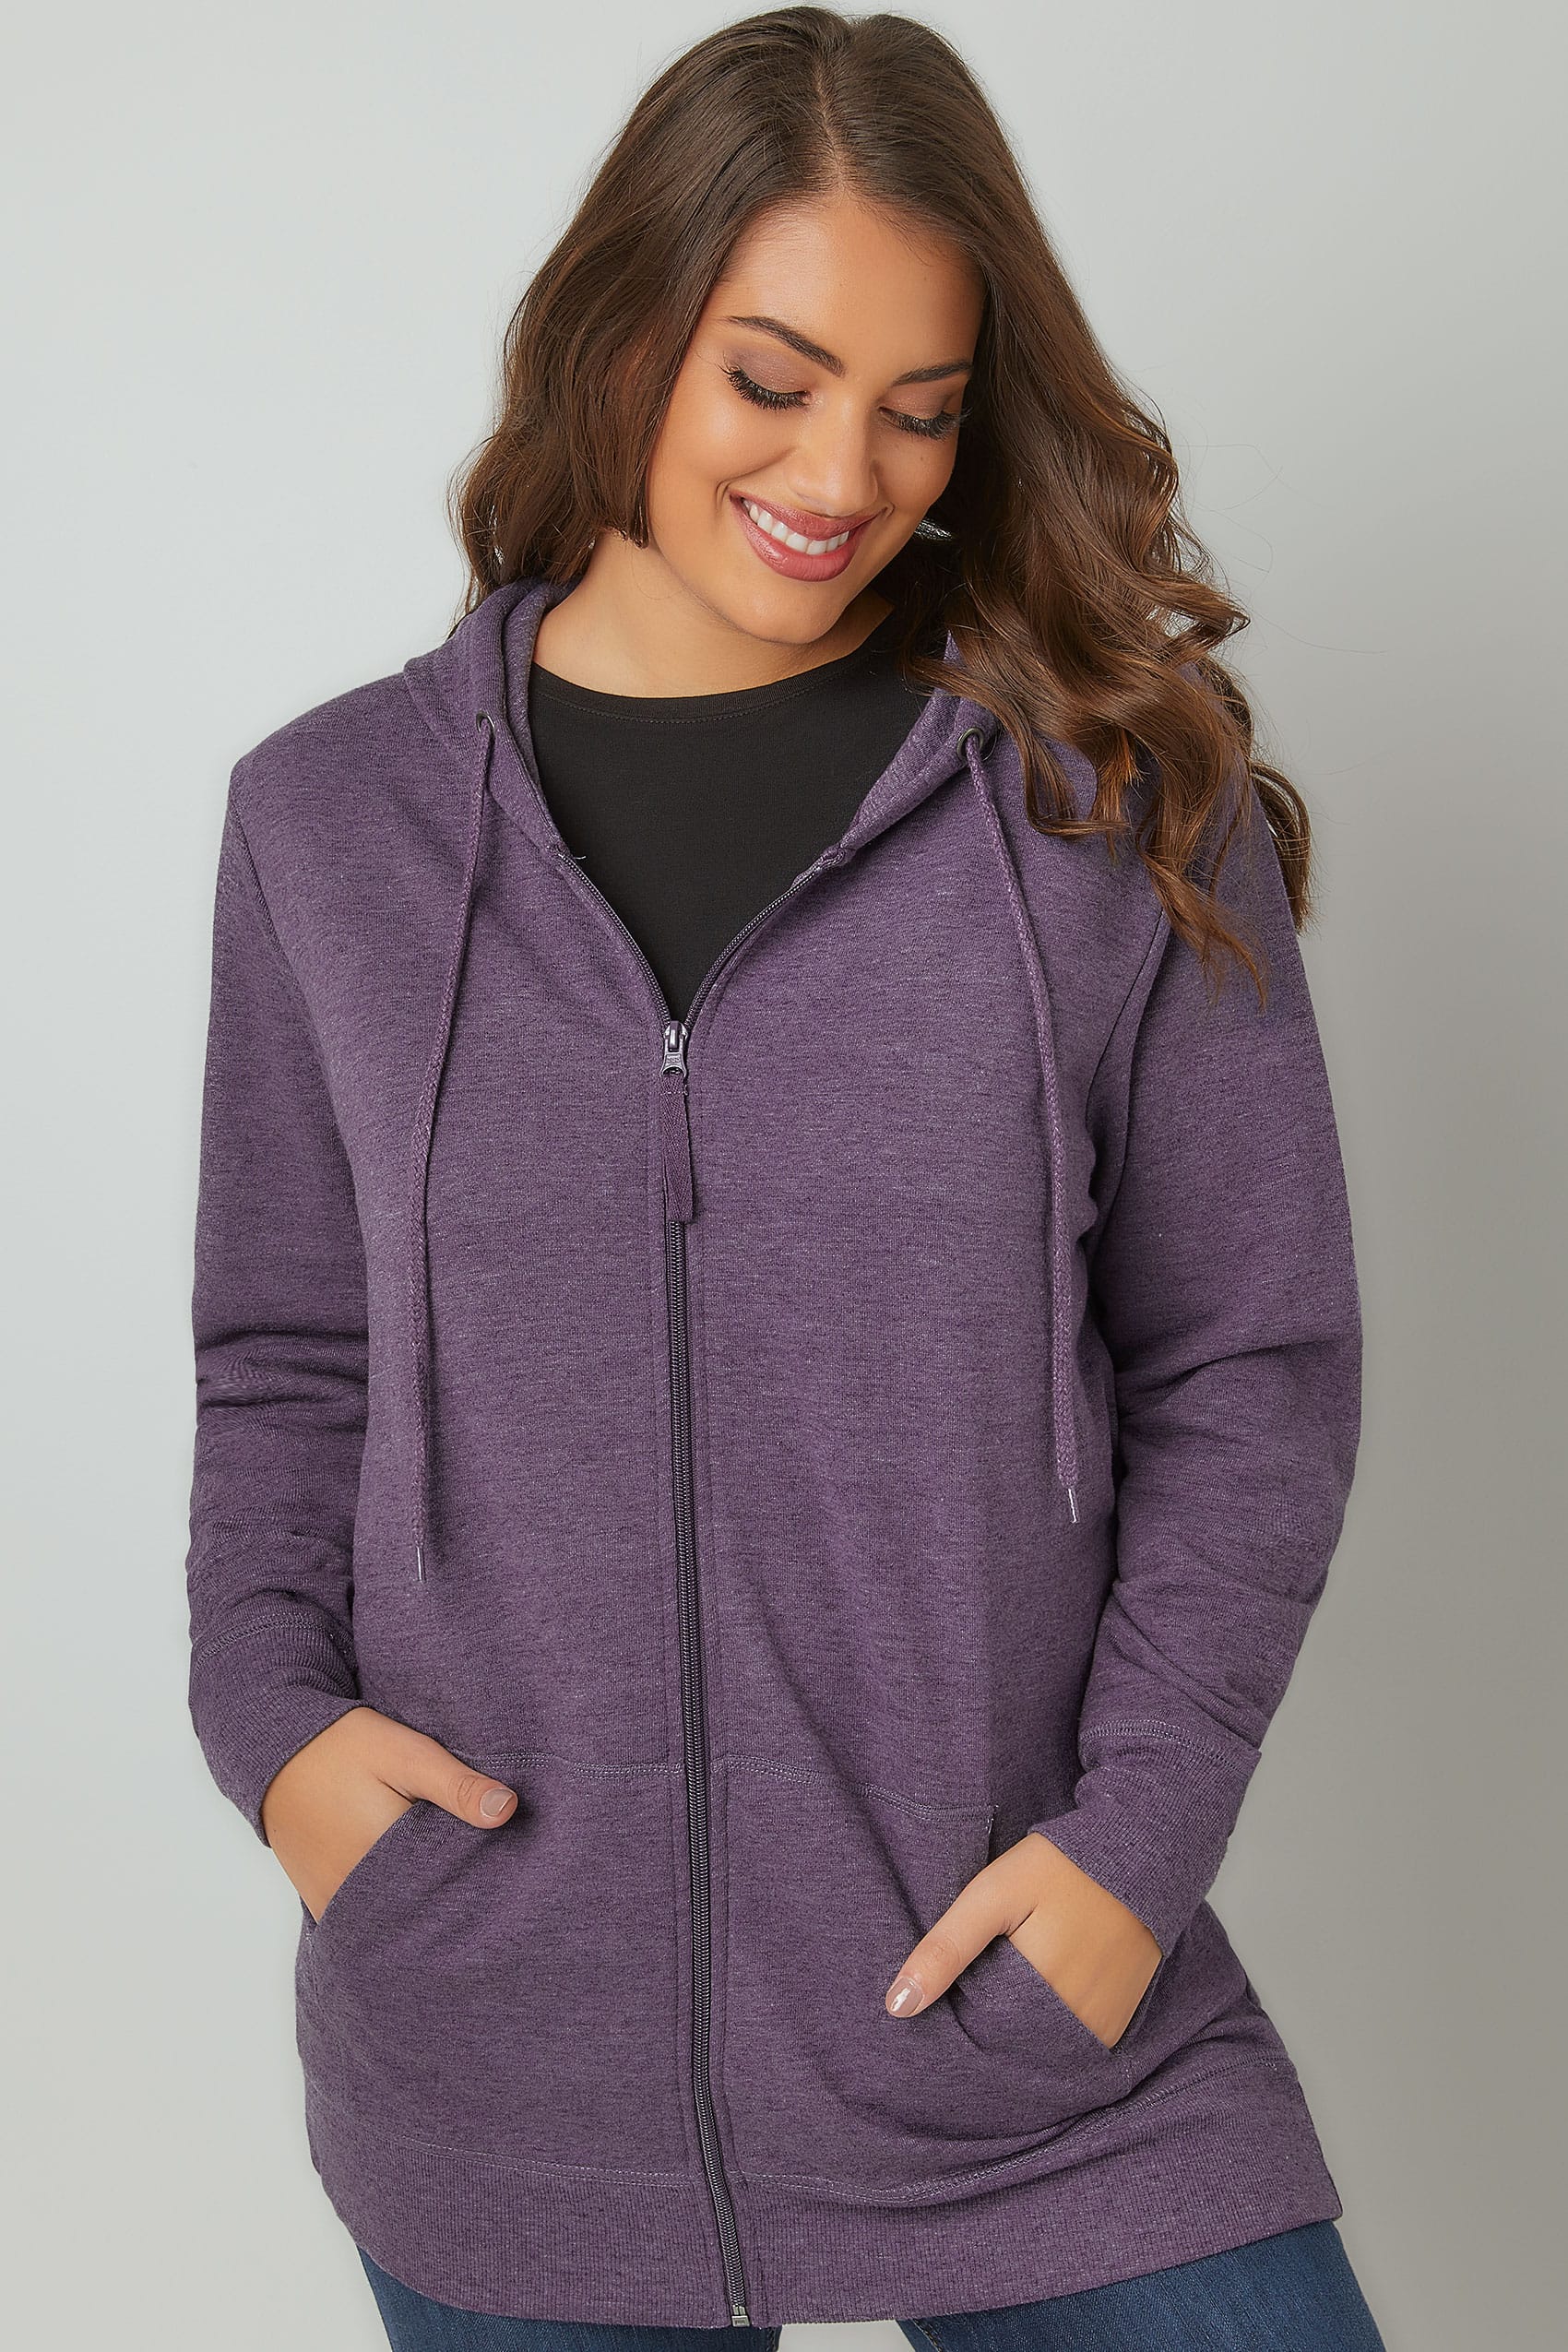 Purple Zip Through Hoodie With Pockets, Plus size 16 to 36